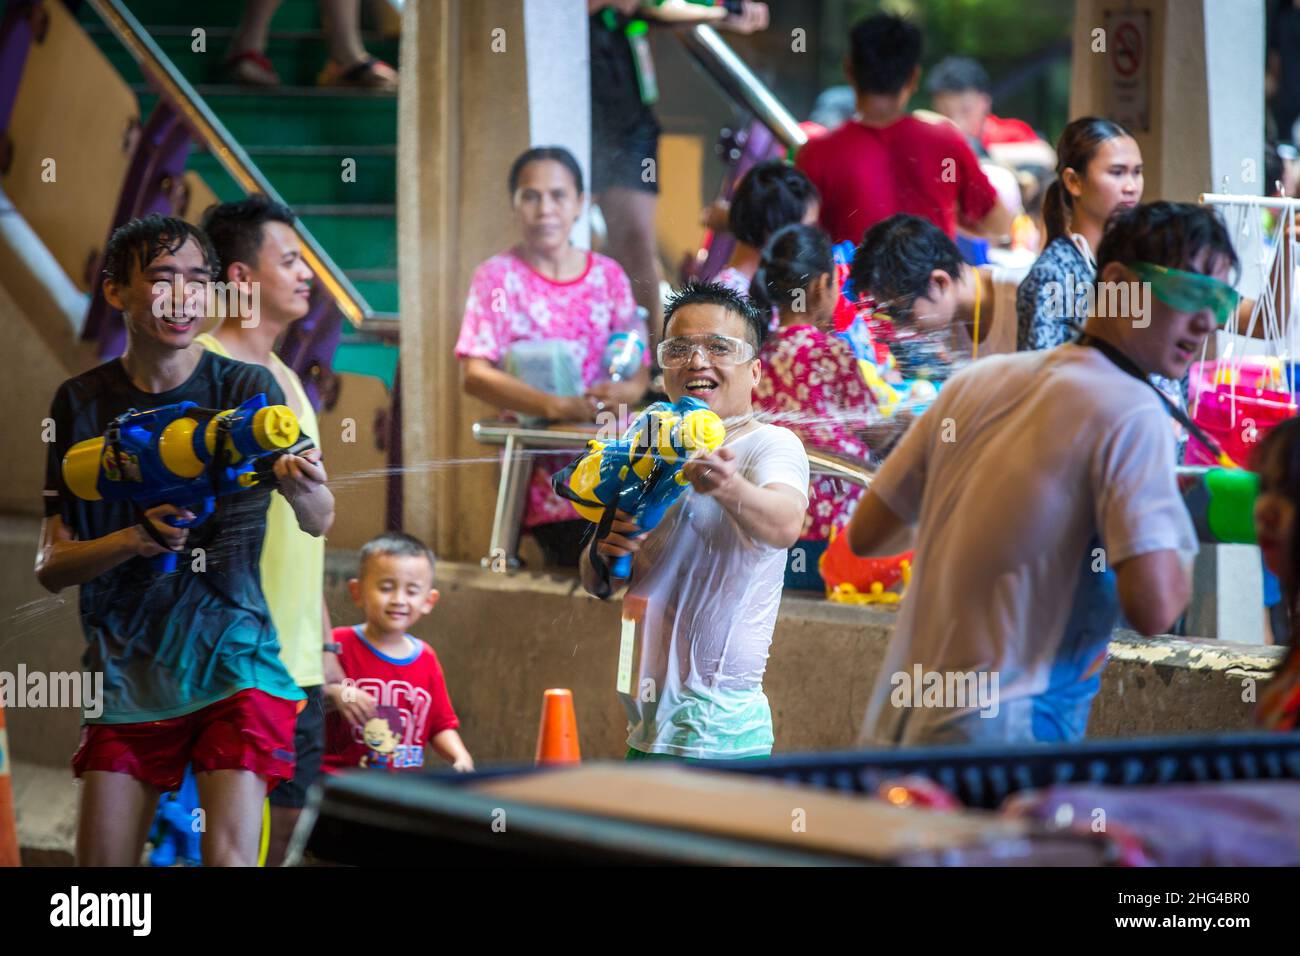 BANGKOK, THAILAND - APRIL 13, 2018: People on the streets of Bangkok celebrating first day of Songkran Festival, Thai New Year celebrations. Stock Photo